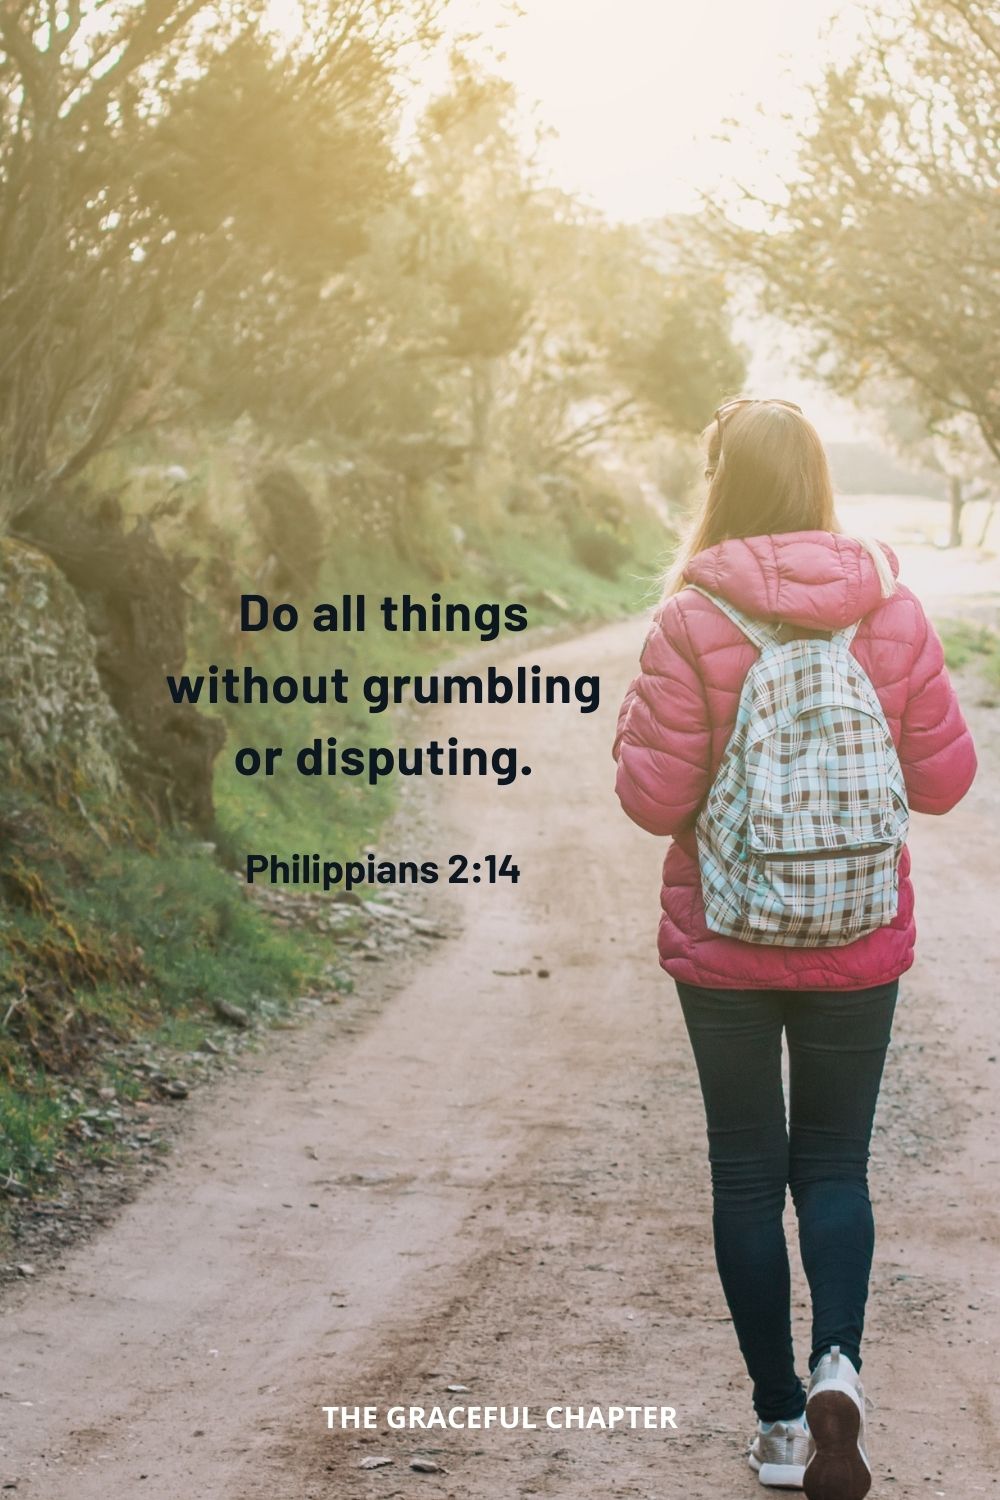 Do all things without grumbling or disputing. Philippians 2:14